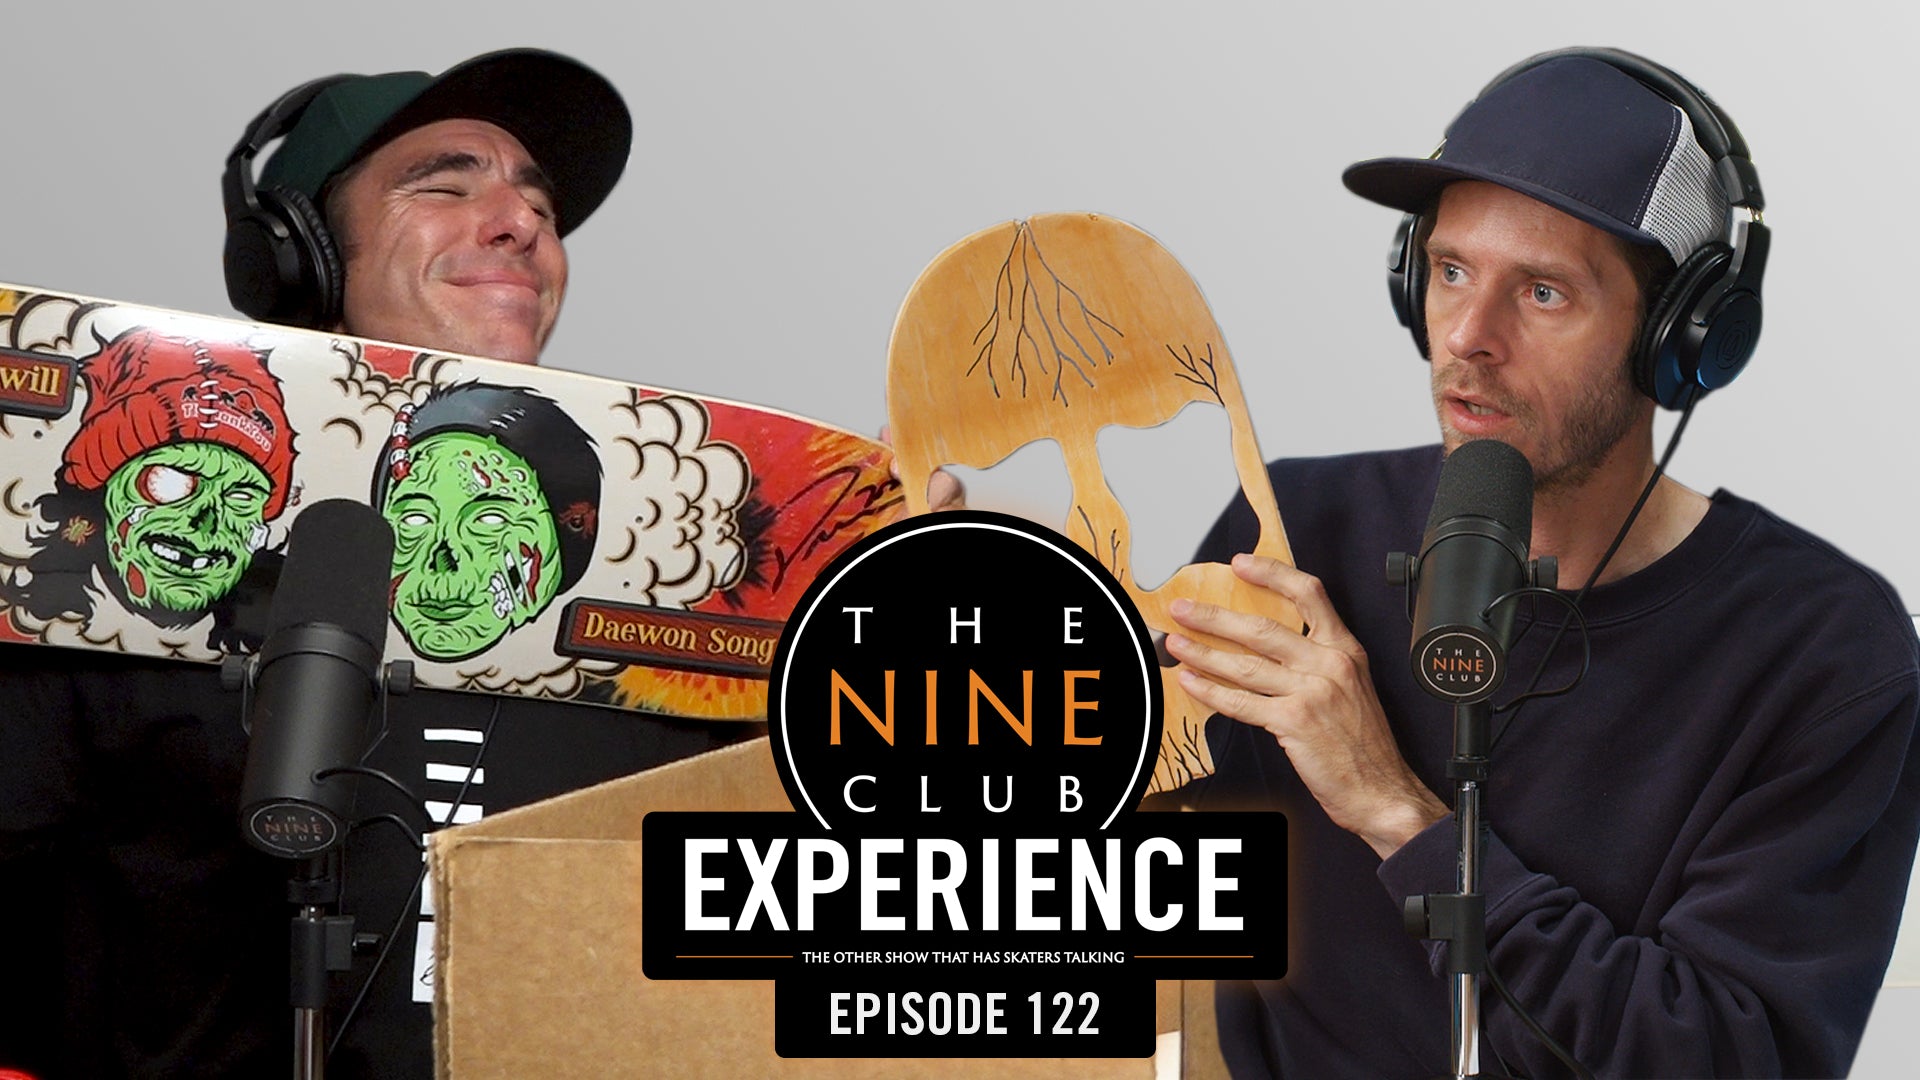 The Nine Club Experience episode 122